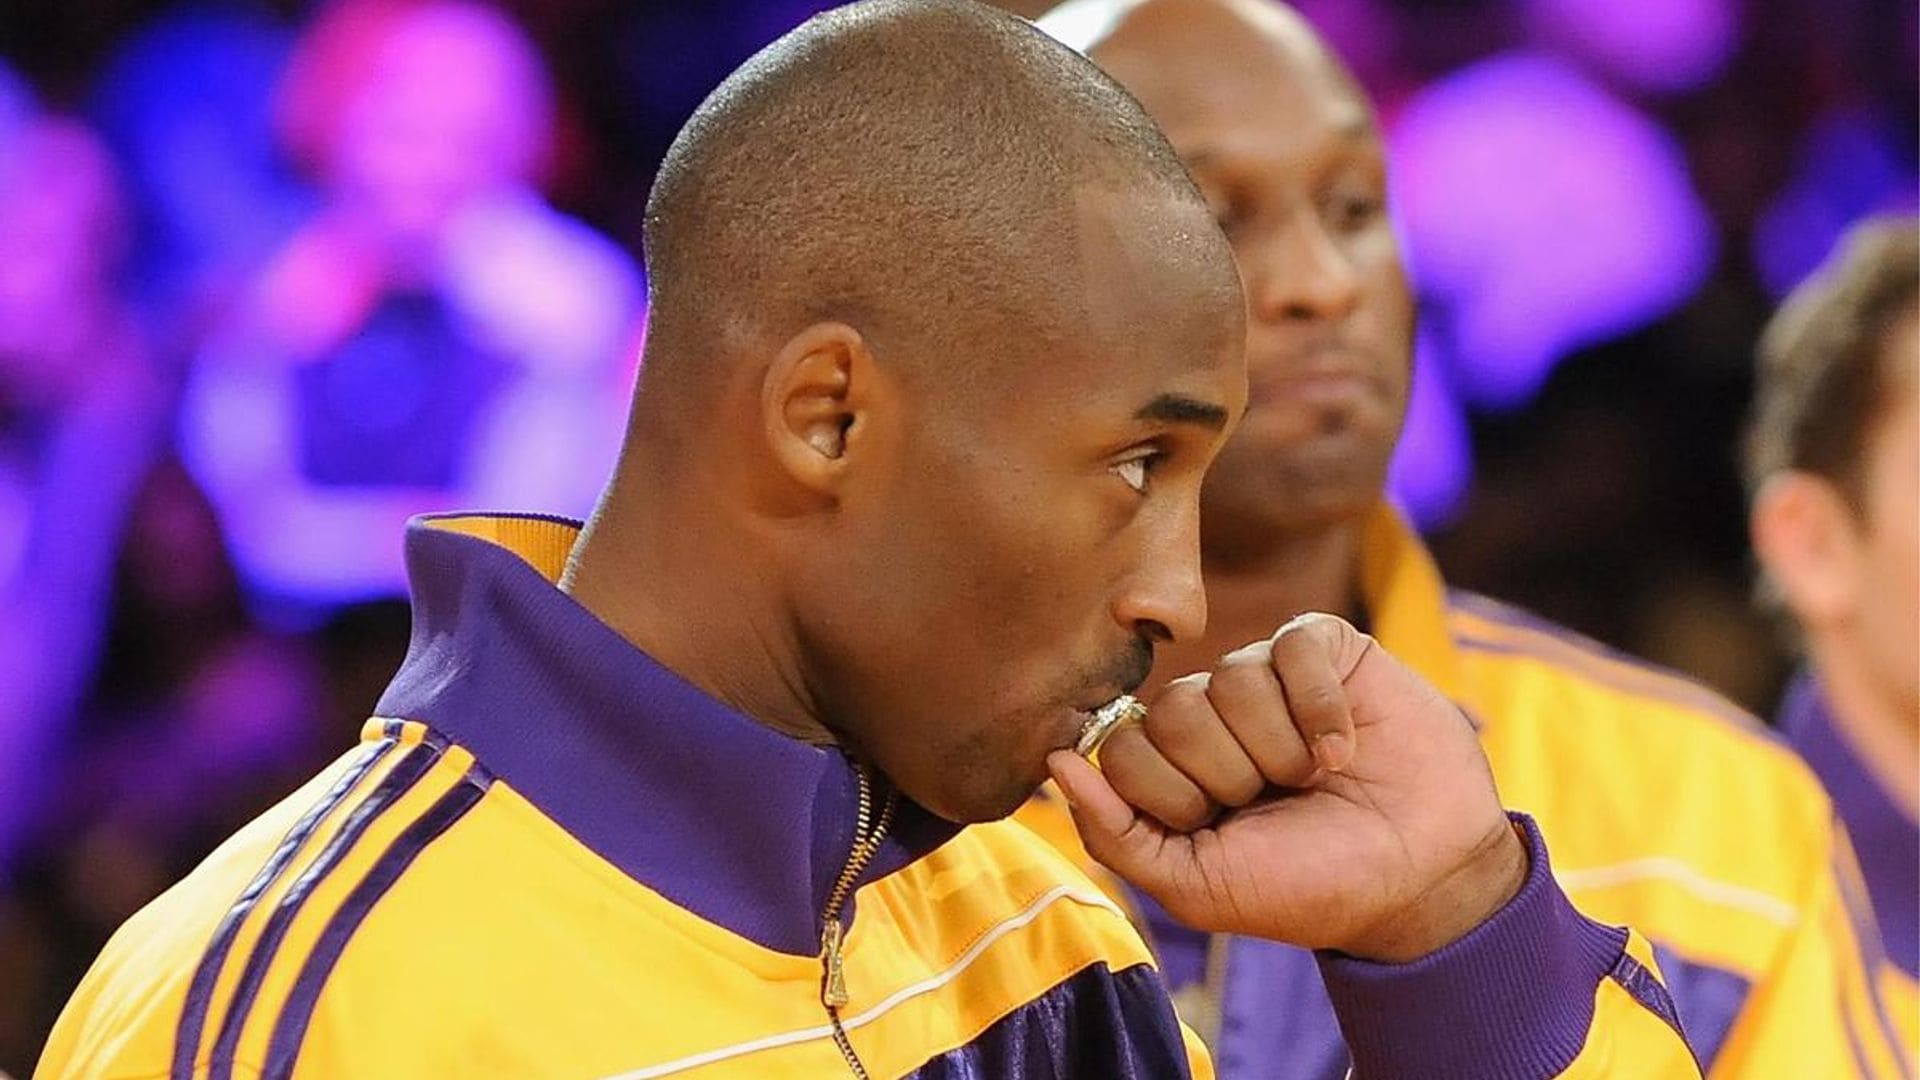 Kobe Bryant’s 2000 Lakers championship ring sells after auction backlash